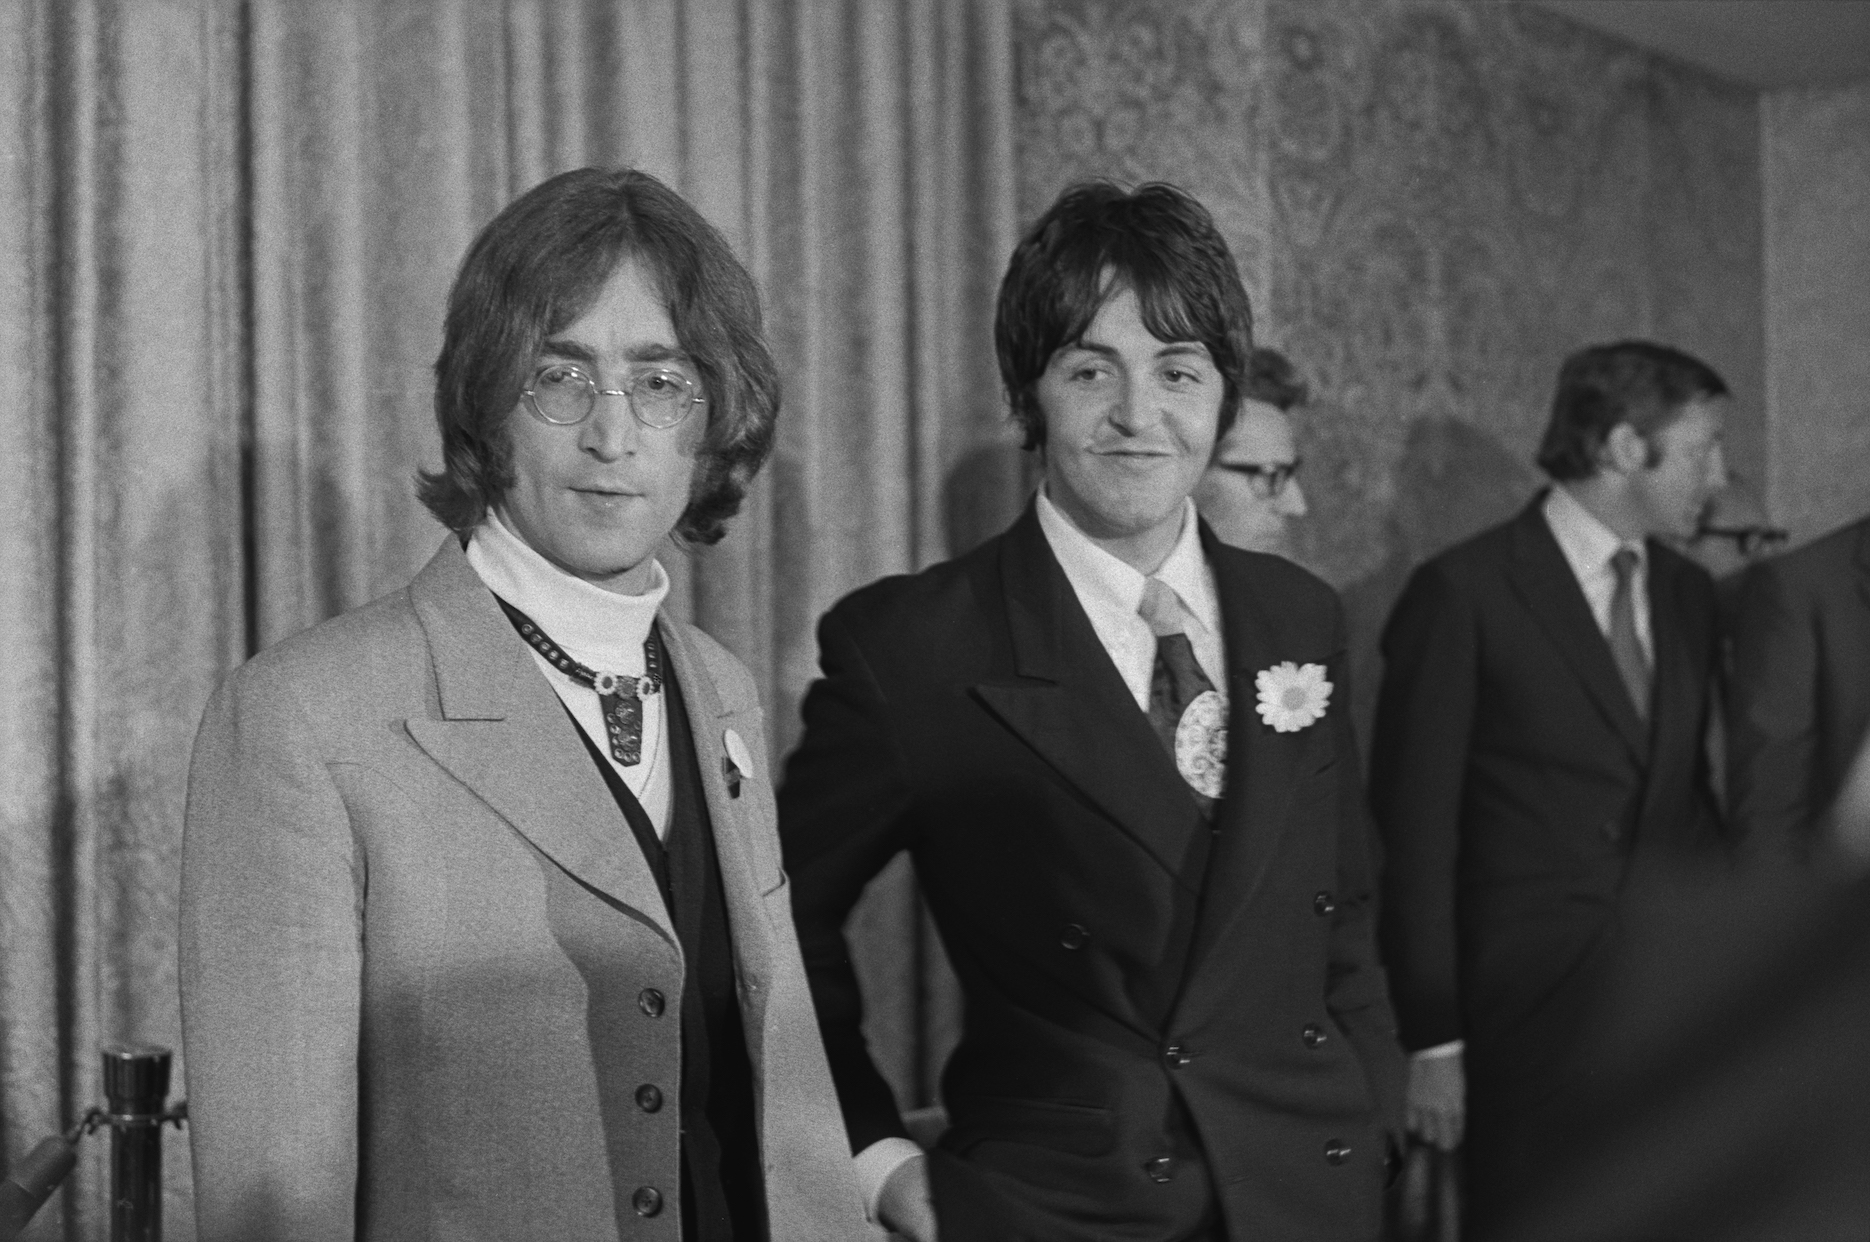 John Lennon and Paul McCartney attend a press conference to announce their business venture Apple Corps